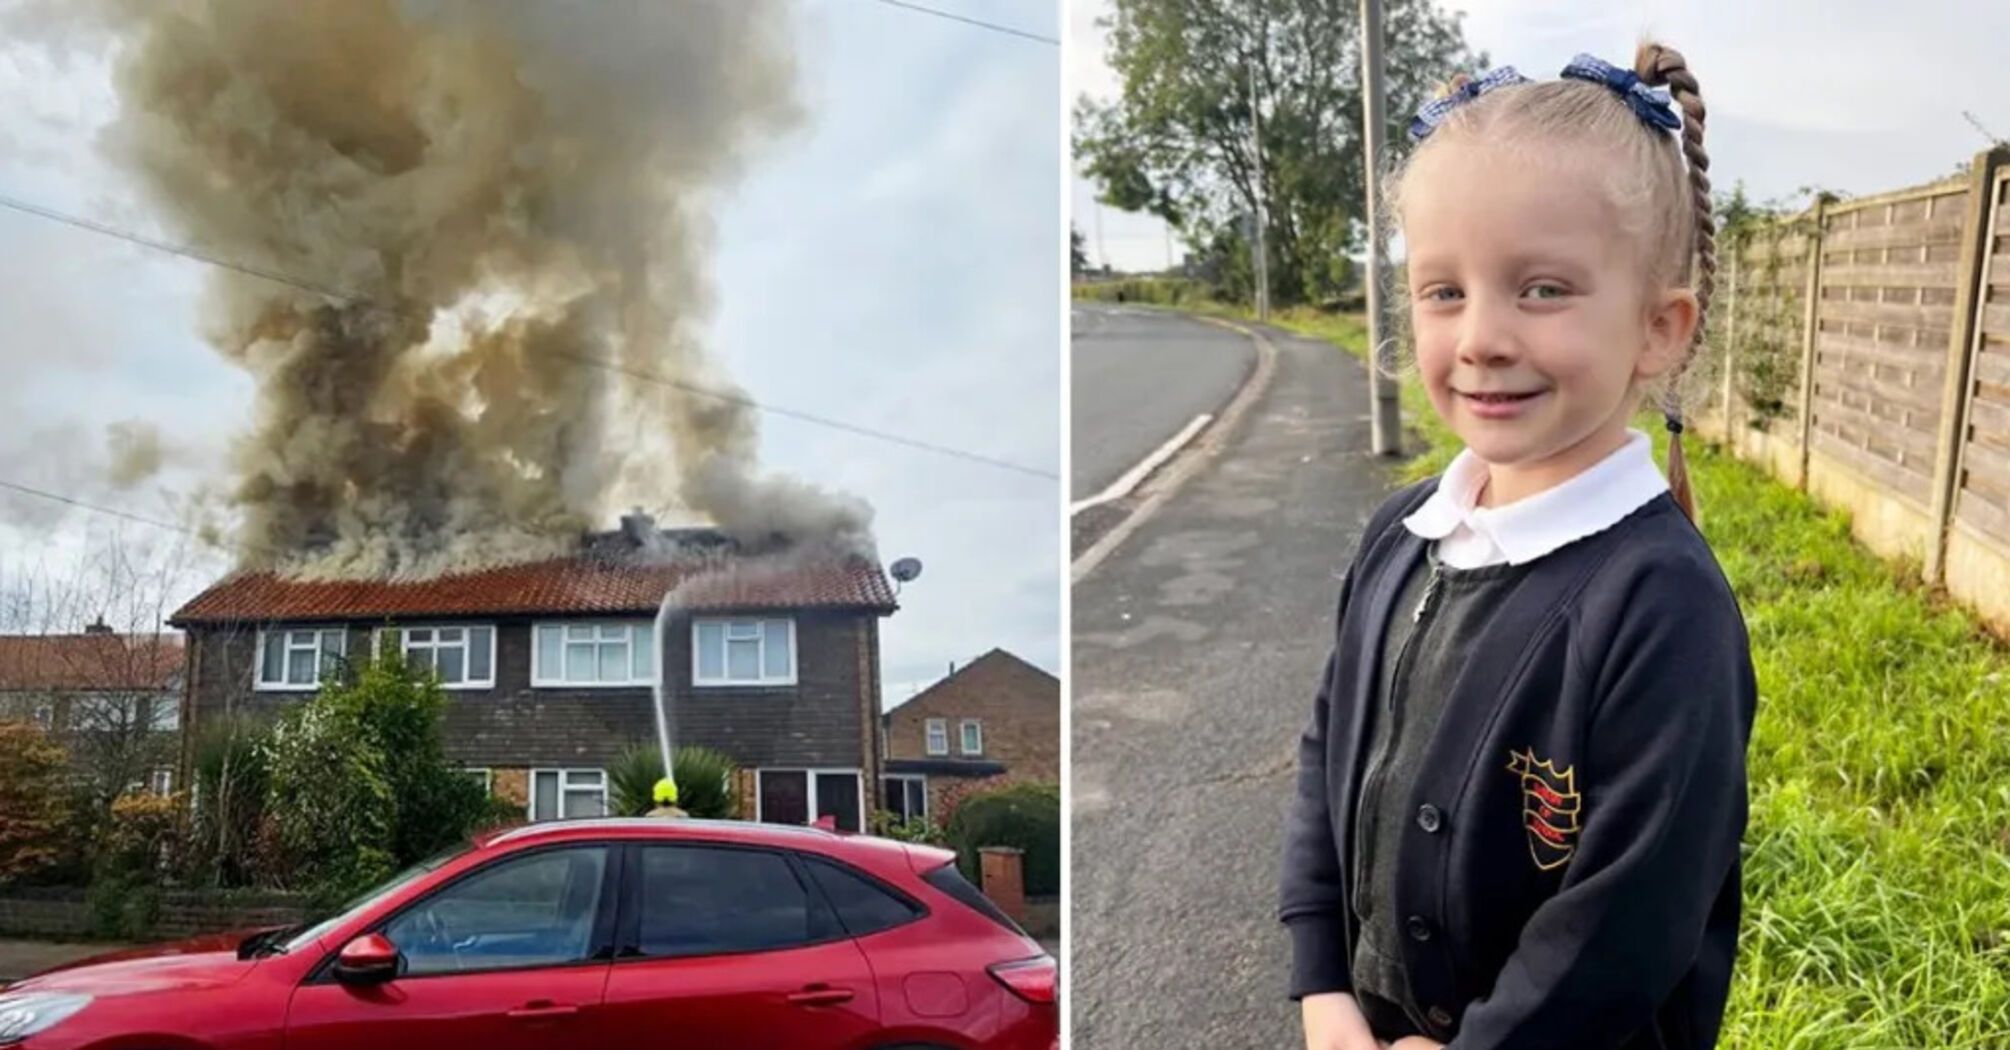 A 6-year-old girl ran into a house on fire